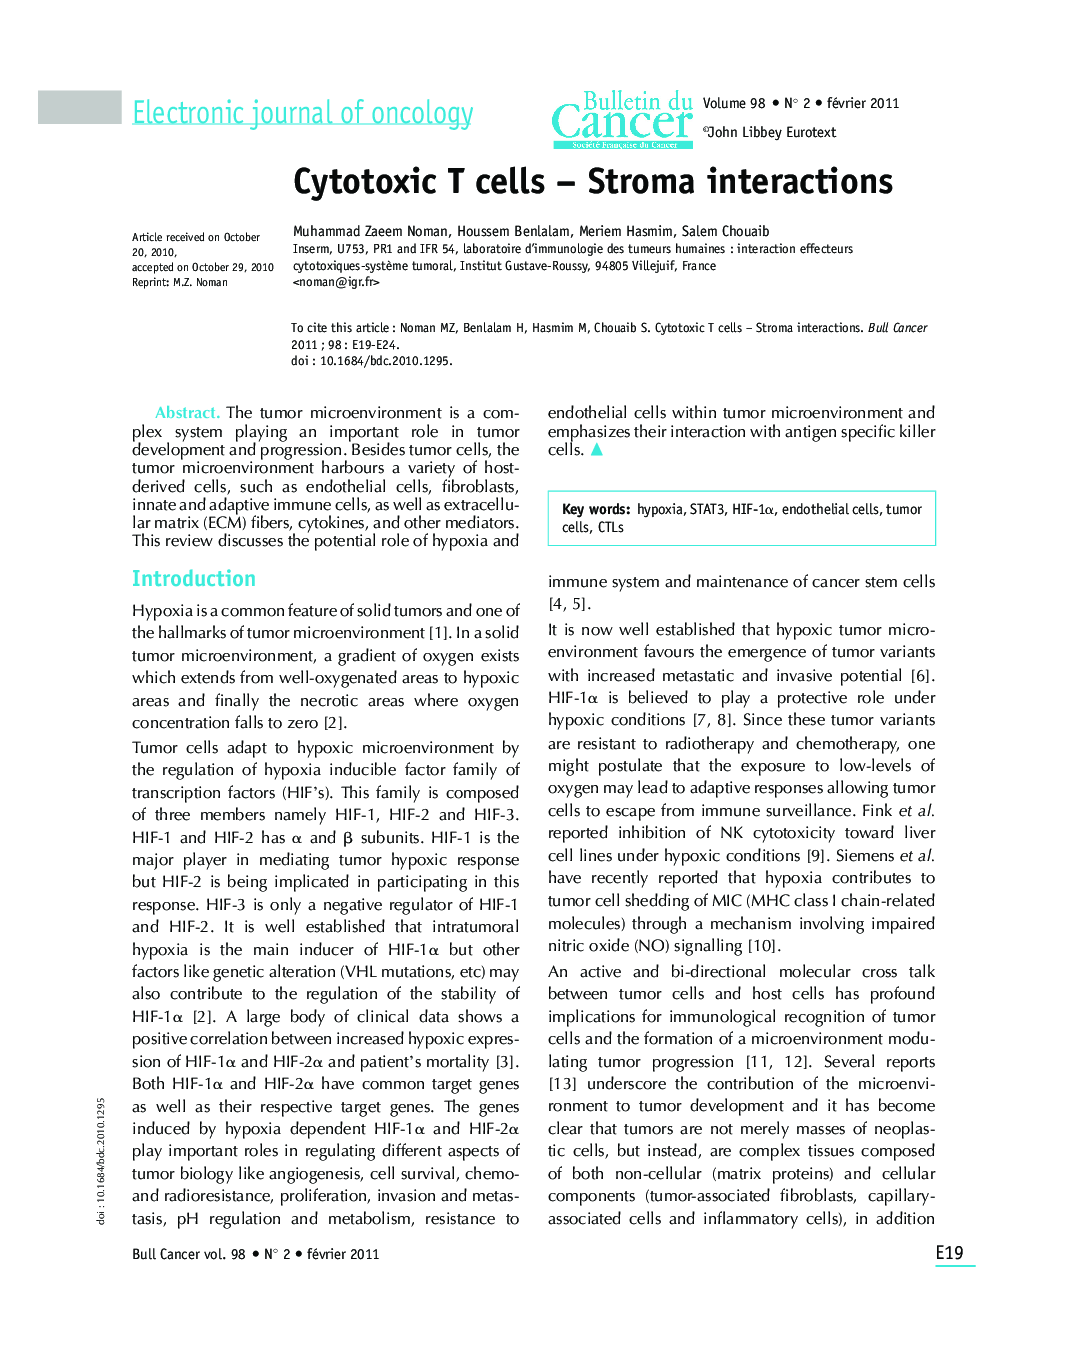 Cytotoxic T cells - Stroma interactions